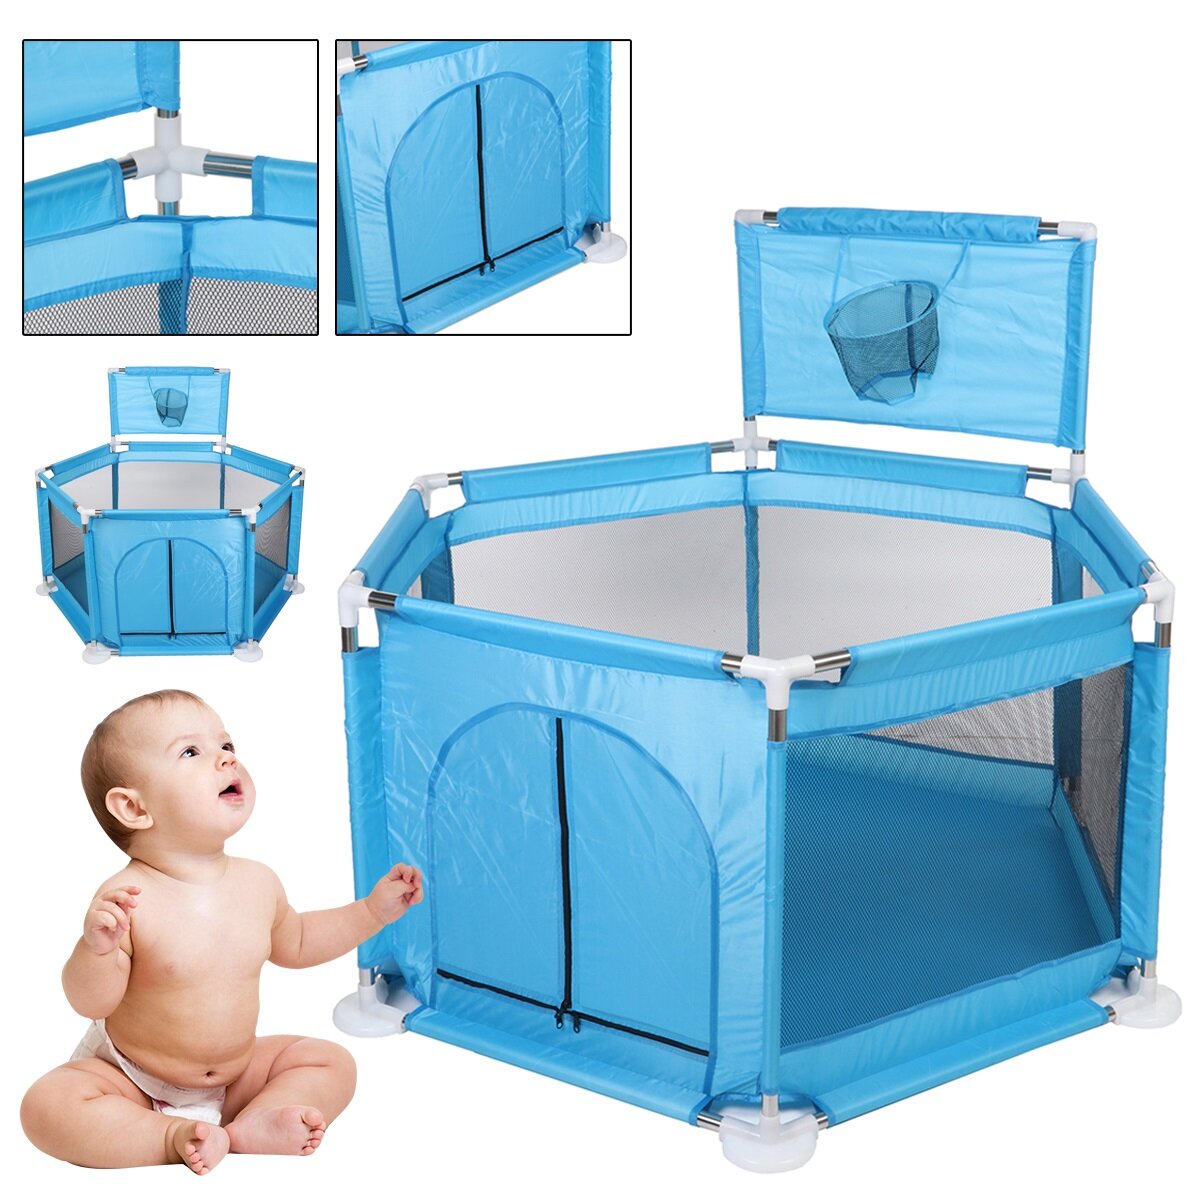 Baby Portable Children's Playpen Folding Child Fence Child Safety Barrier Ball Pool Kids Bed Fence P